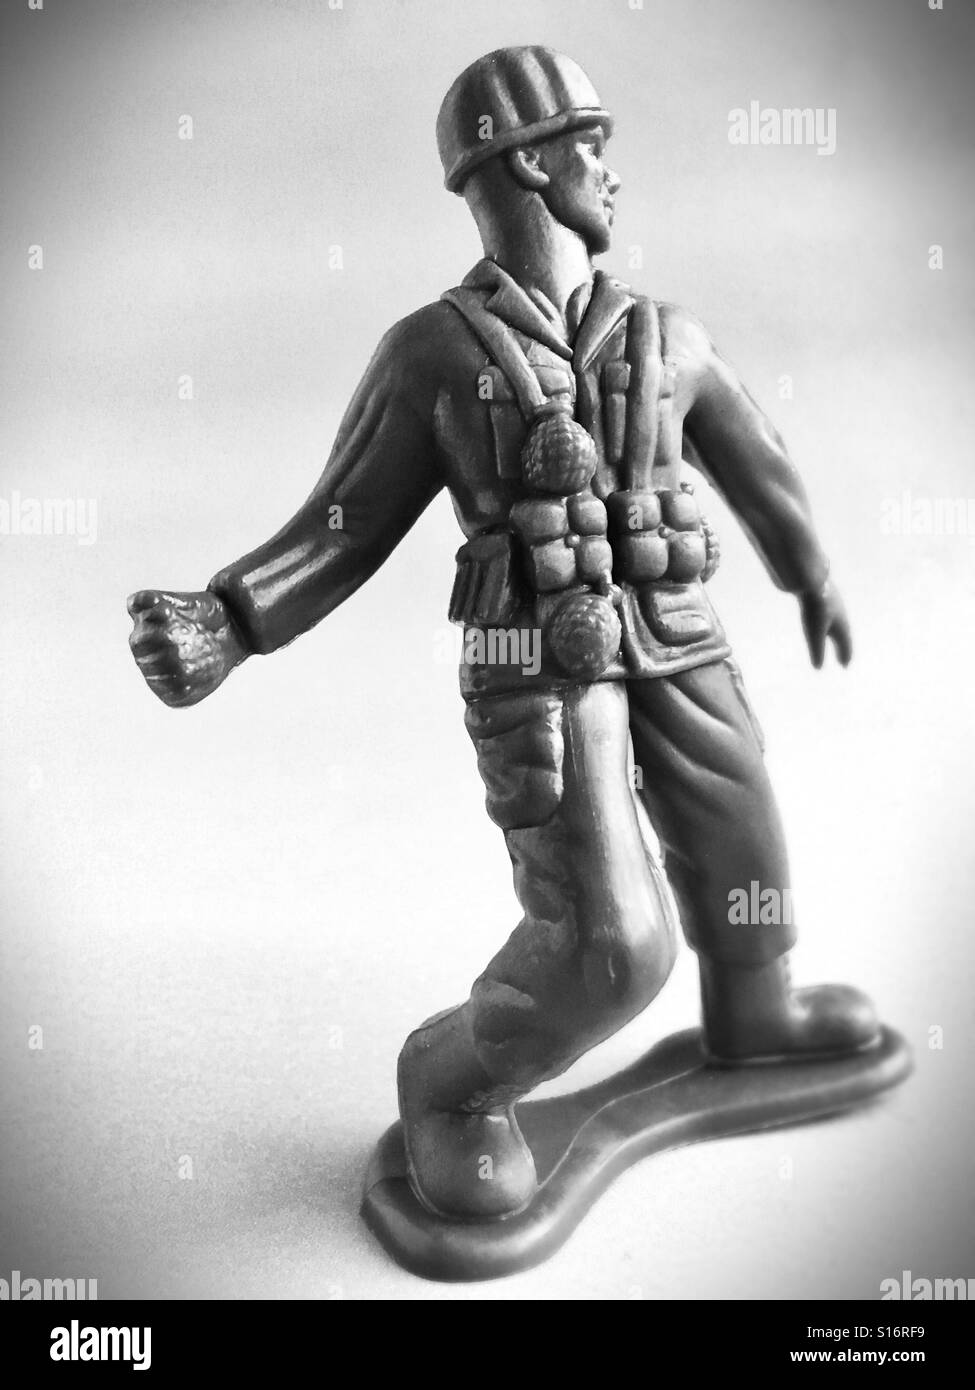 A toy soldier holding a hand grenade. Stock Photo